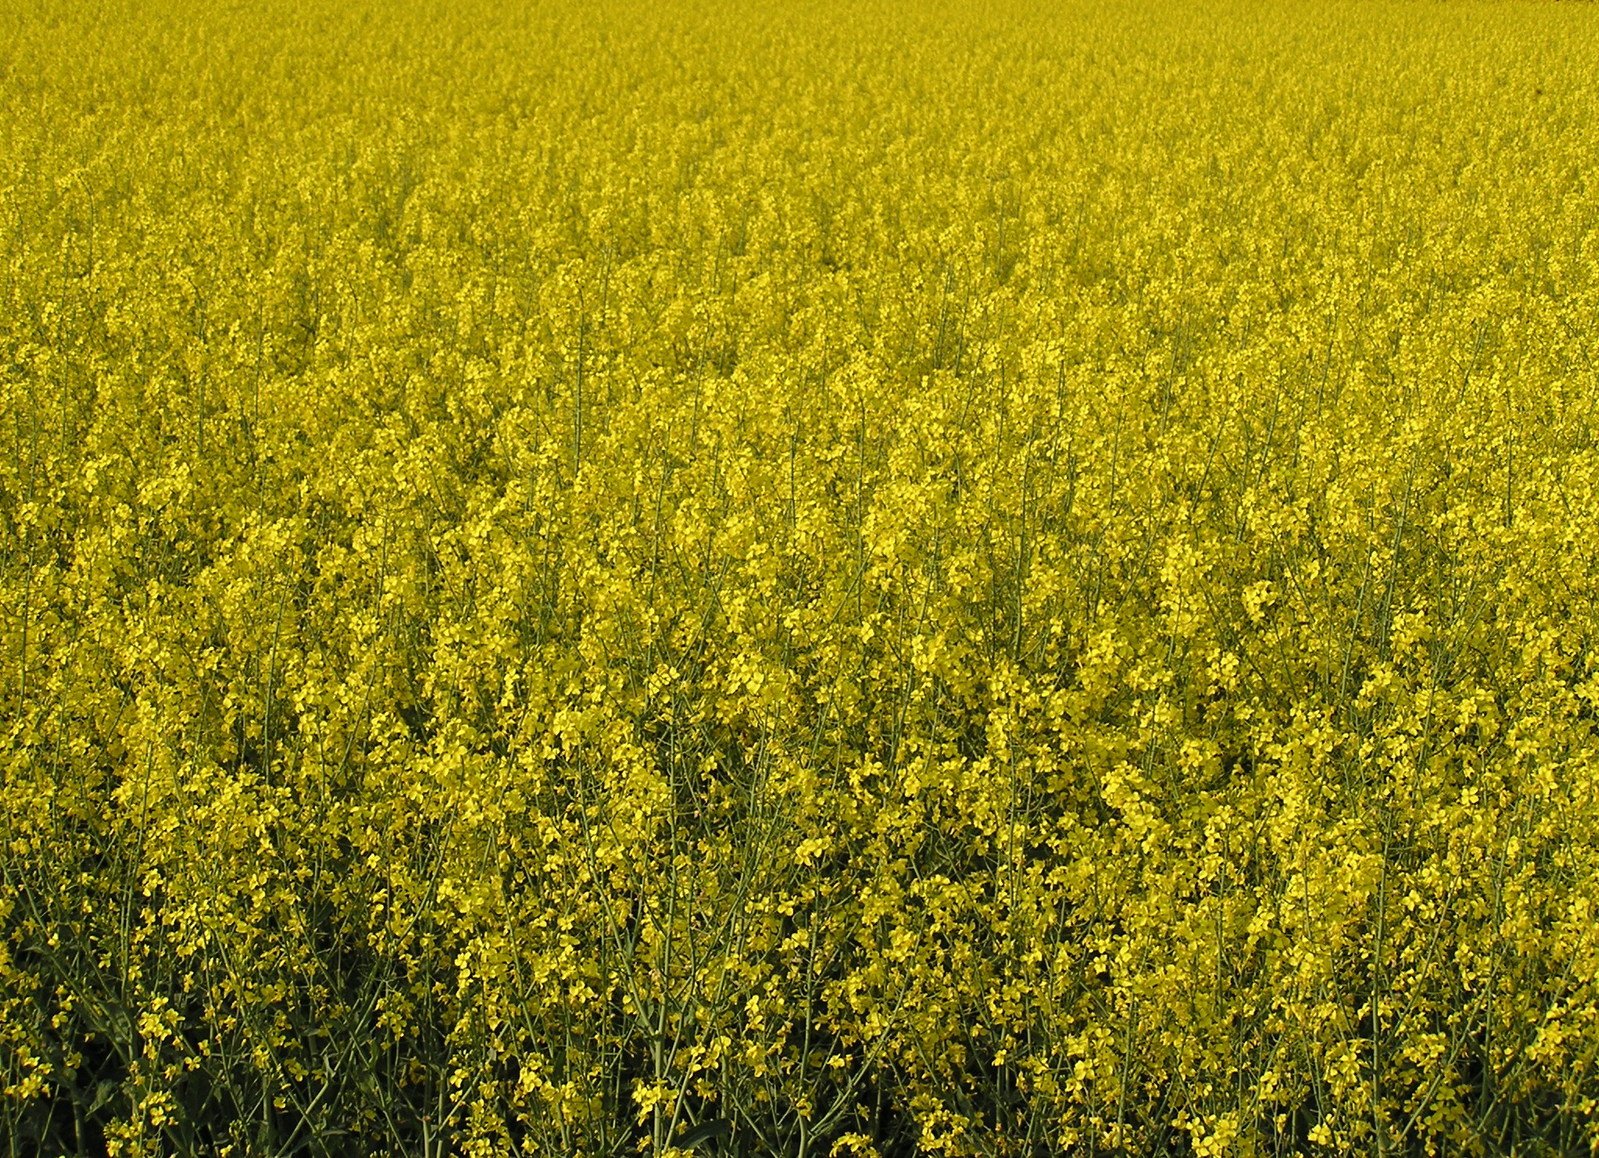 a yellow flower field is shown with green grass